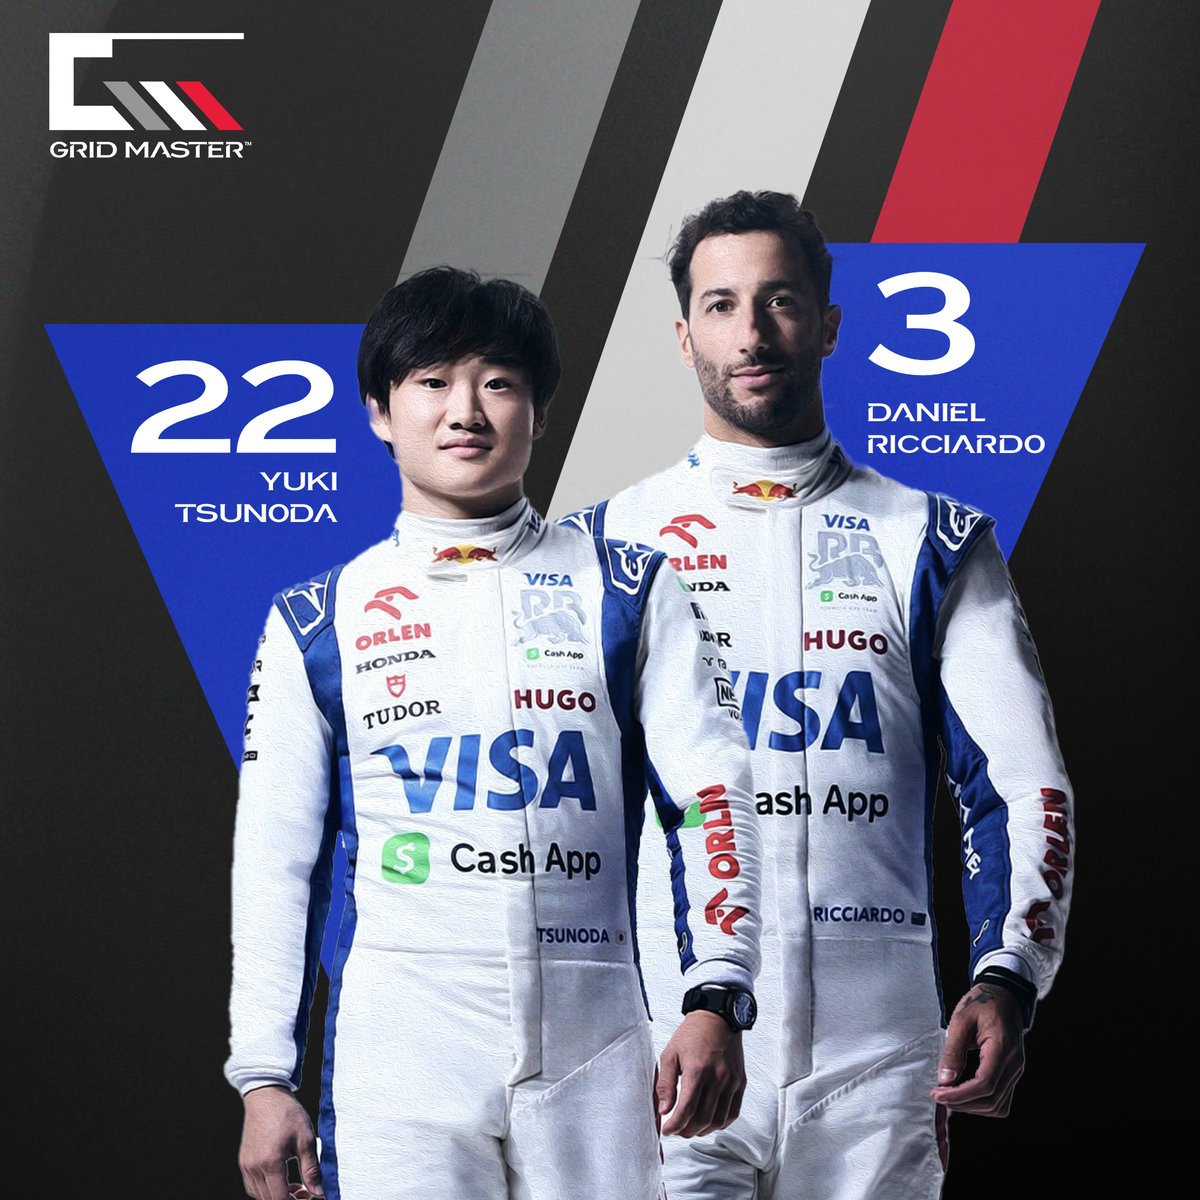 Introducing the Visa CashApp RB’s V-CARB01. Is it the best ‘painted’ carbohydrate in the world? 🧐
.
.
#F1 #F12024 #AlphaTauri #alphataurif1 #danielricciardo #yukitsunoda #visacashapprb #VCARB01